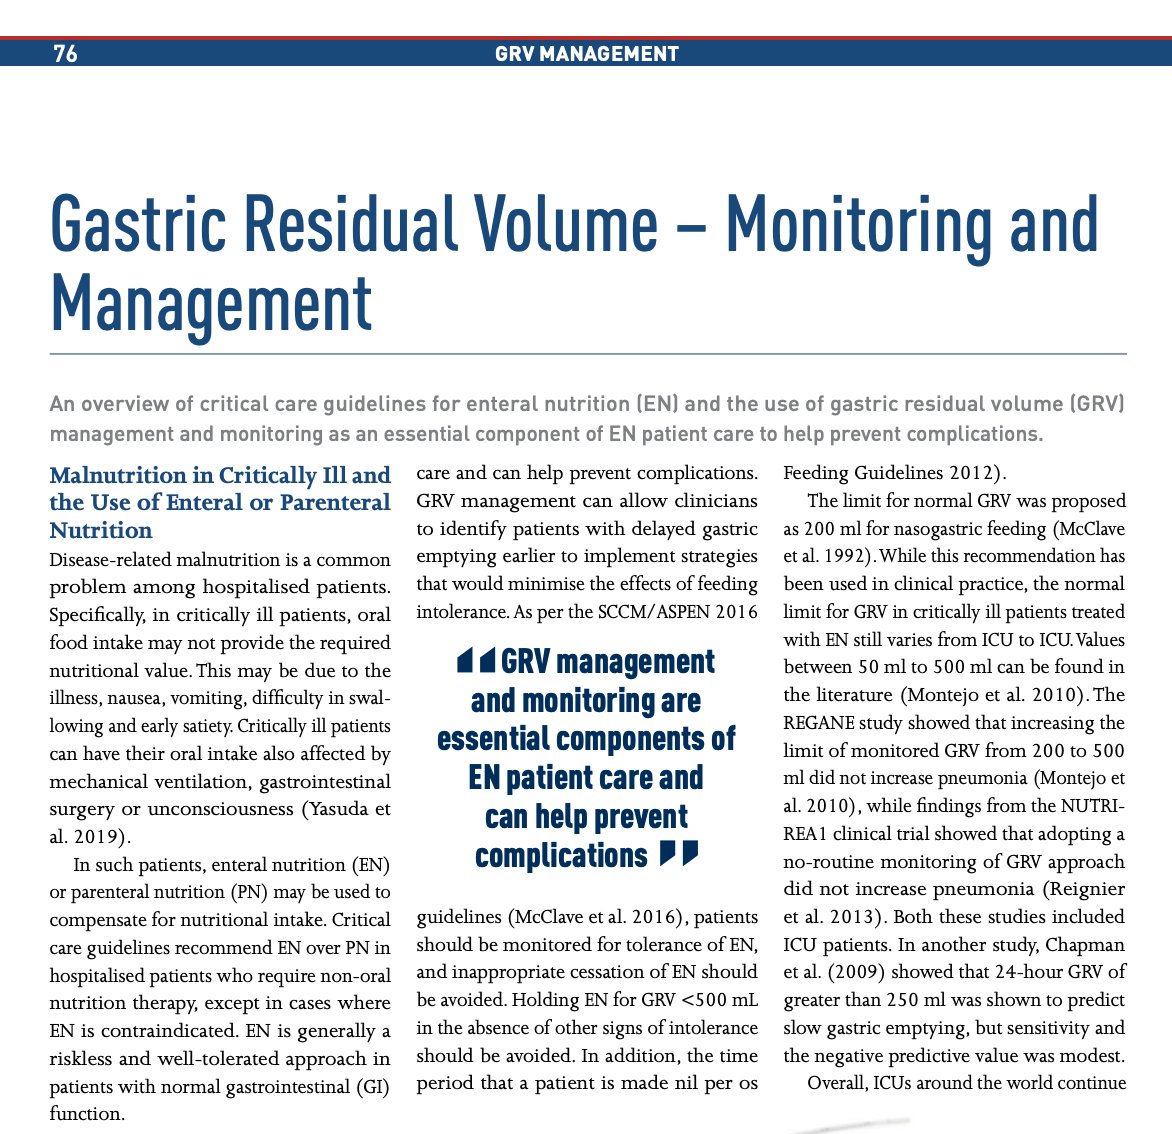 📌 An overview of critical care guidelines for enteral nutrition and the use of GRV management..
Find out more ➡️ iii.hm/icu22022axiump…
#Gastricresidualvolume #GRV #Enteralnutrition #Parenteralnutrition